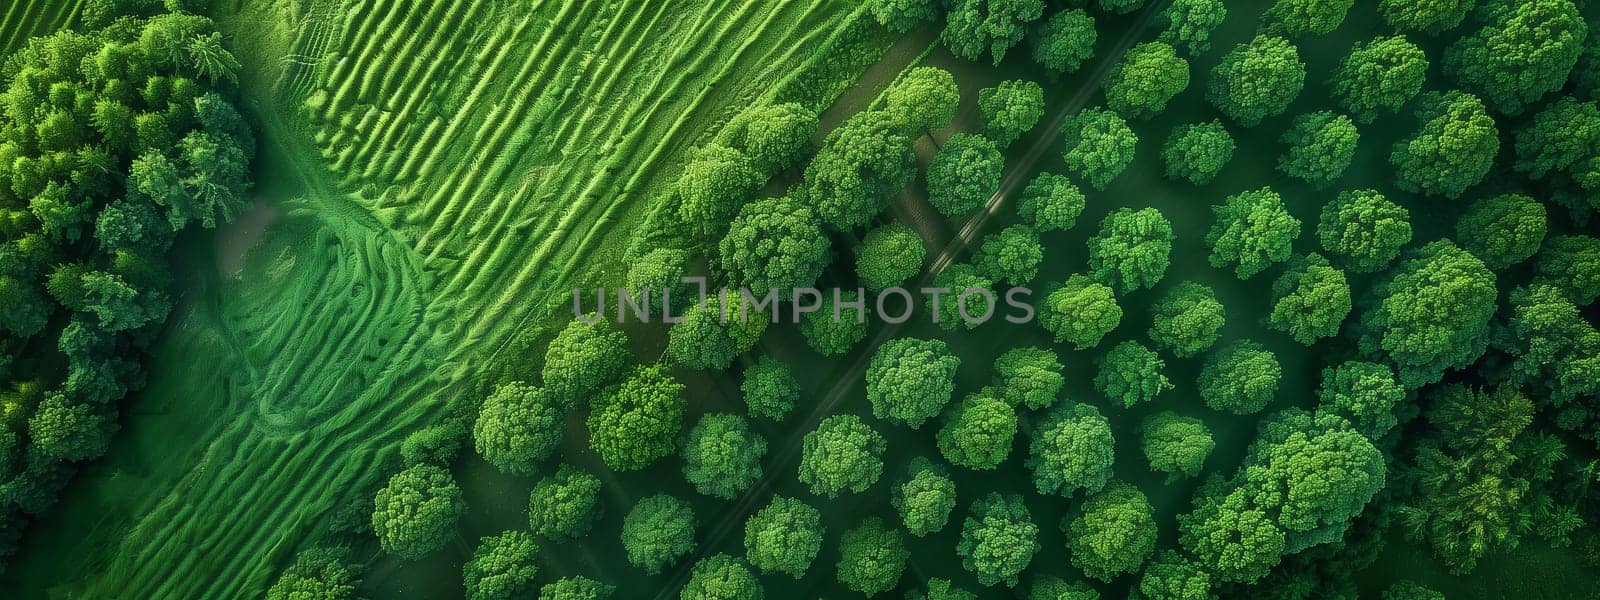 Aerial view of symmetrical patterns in lush green vegetation by richwolf